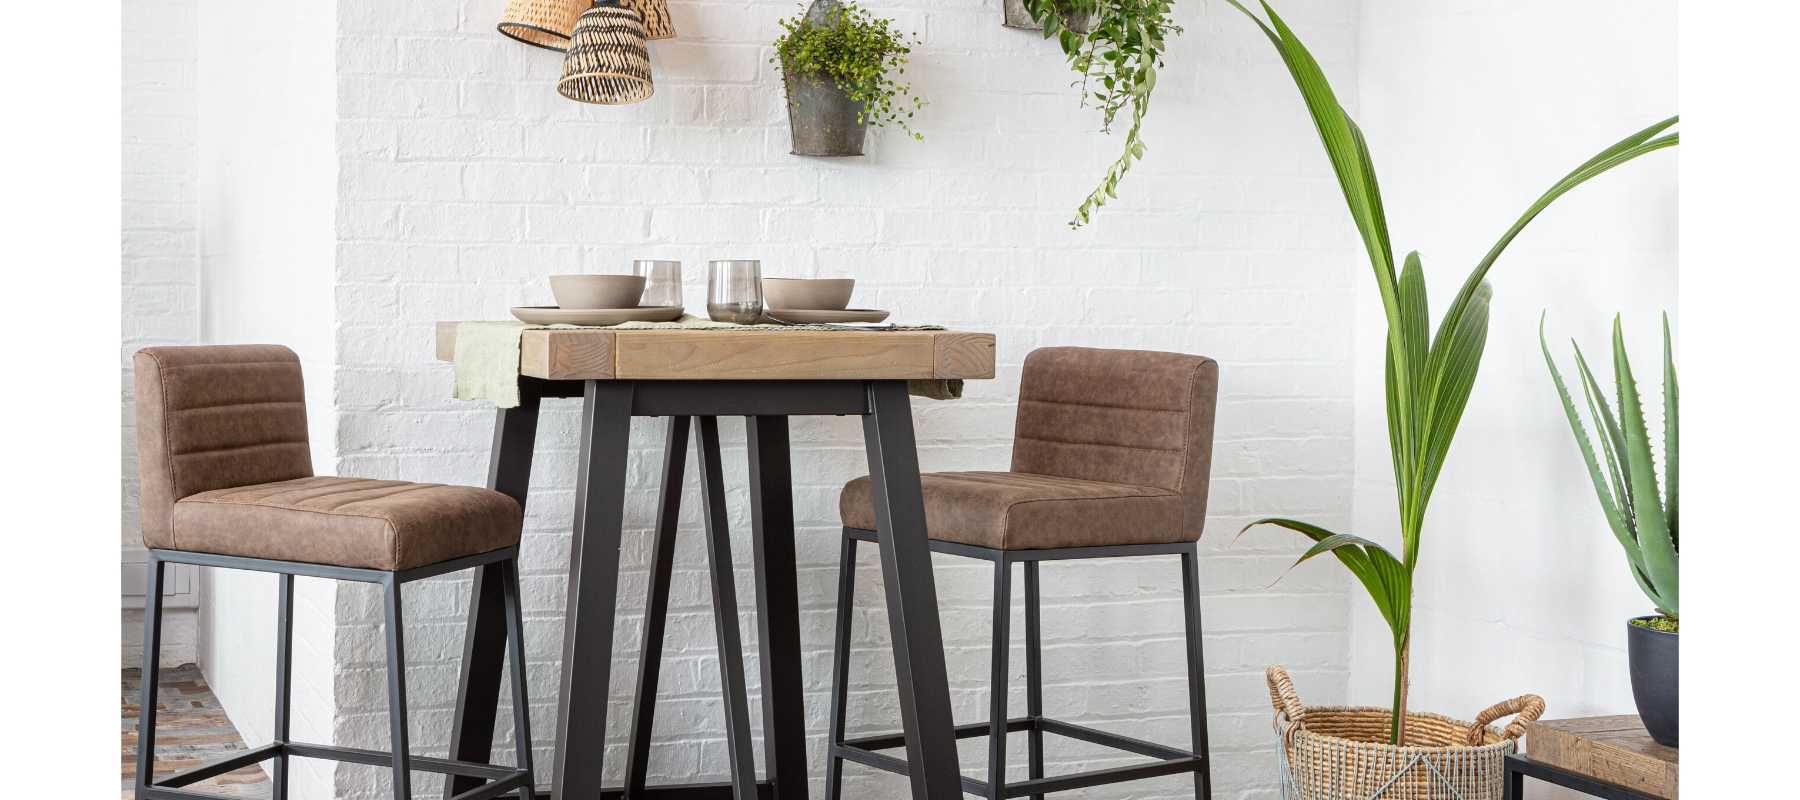 Wooden bar table with black steel legs and bar stools